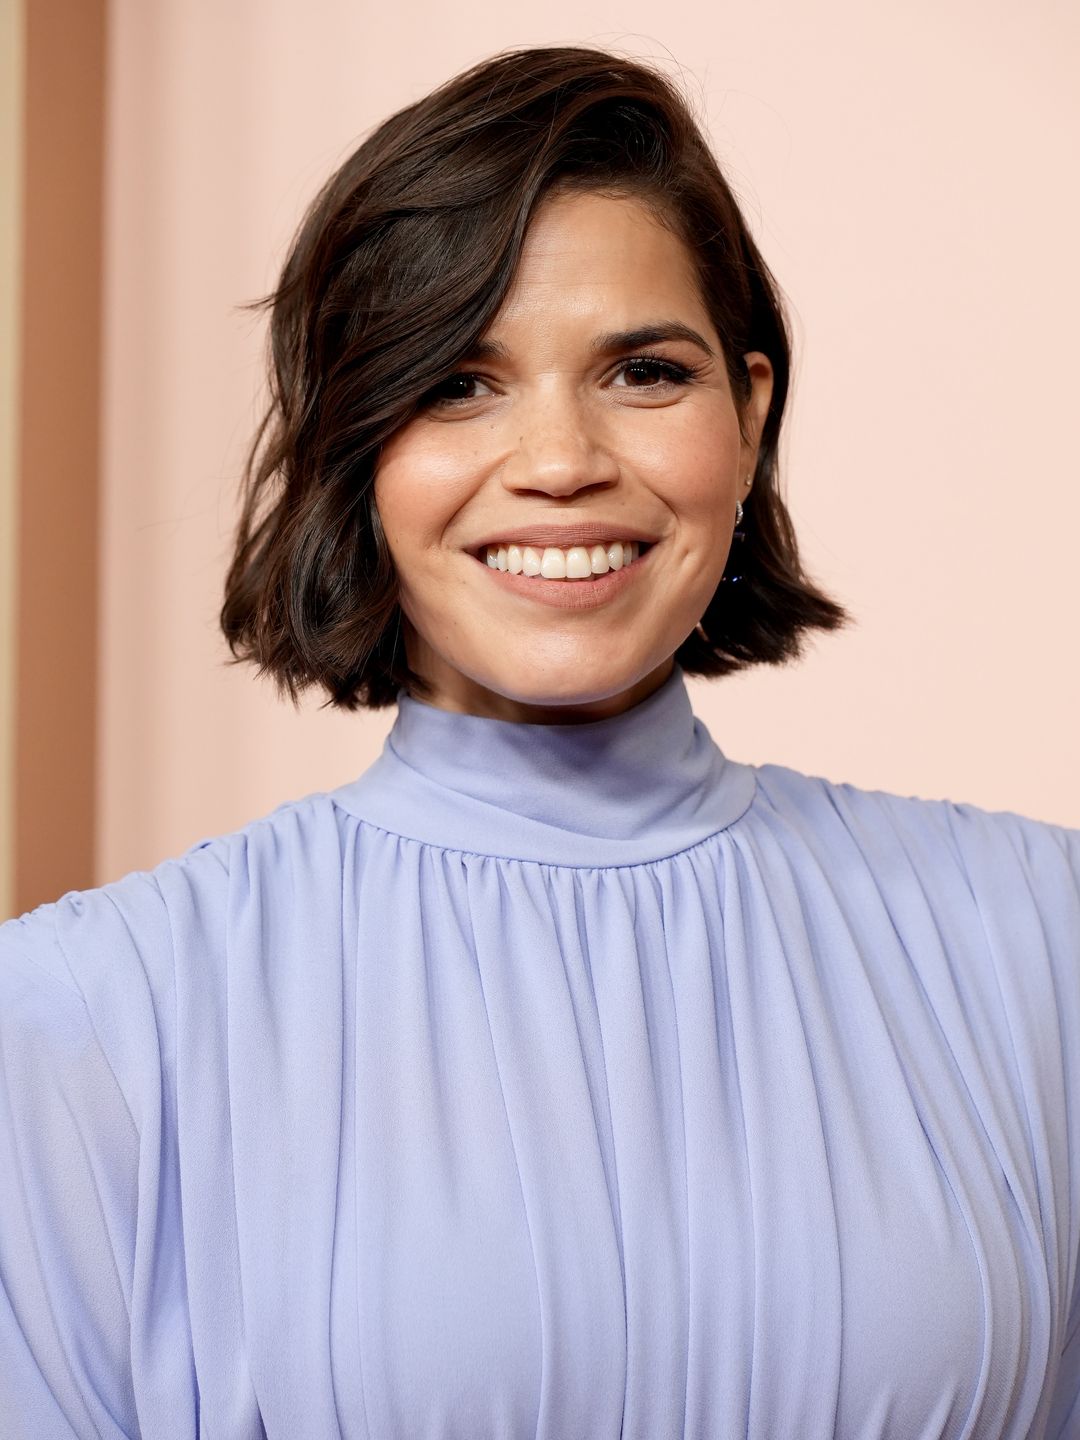 America Ferrera in a pale blue high-necked dress at the Oscars Luncheon